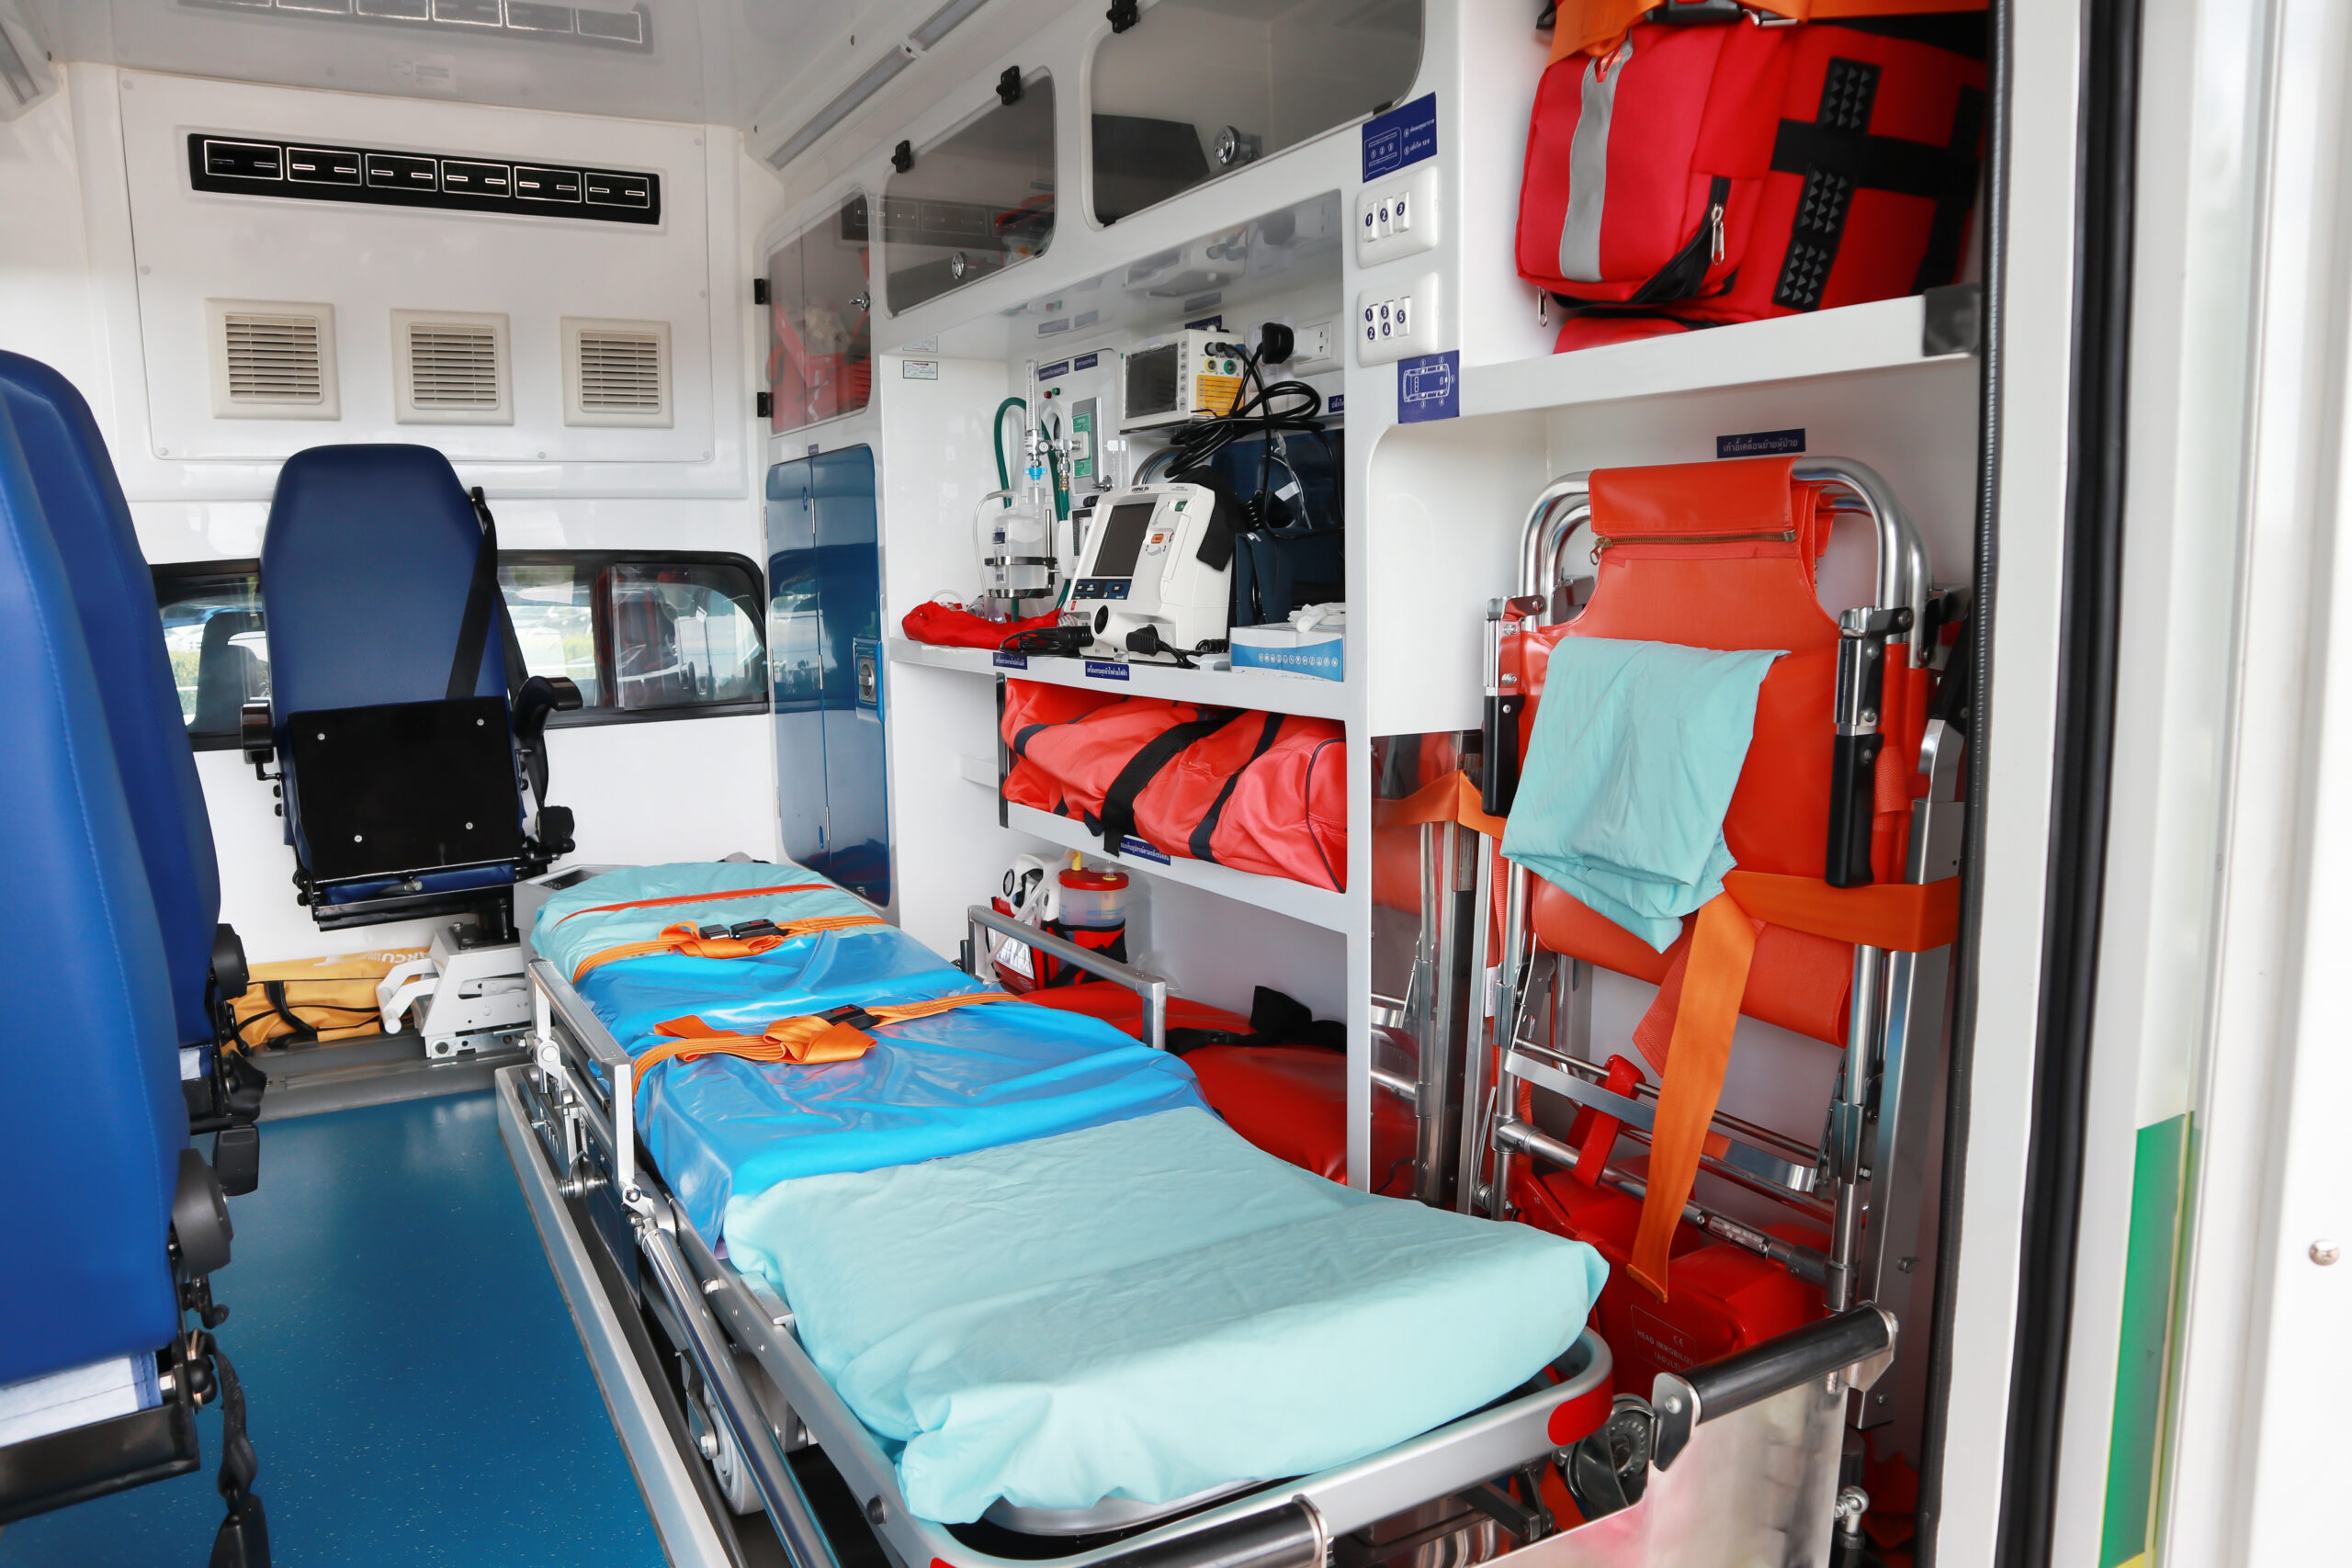 The interior of an ambulance, showing a medical stretcher, seats, and a wall packed with medical and rescue supplies.